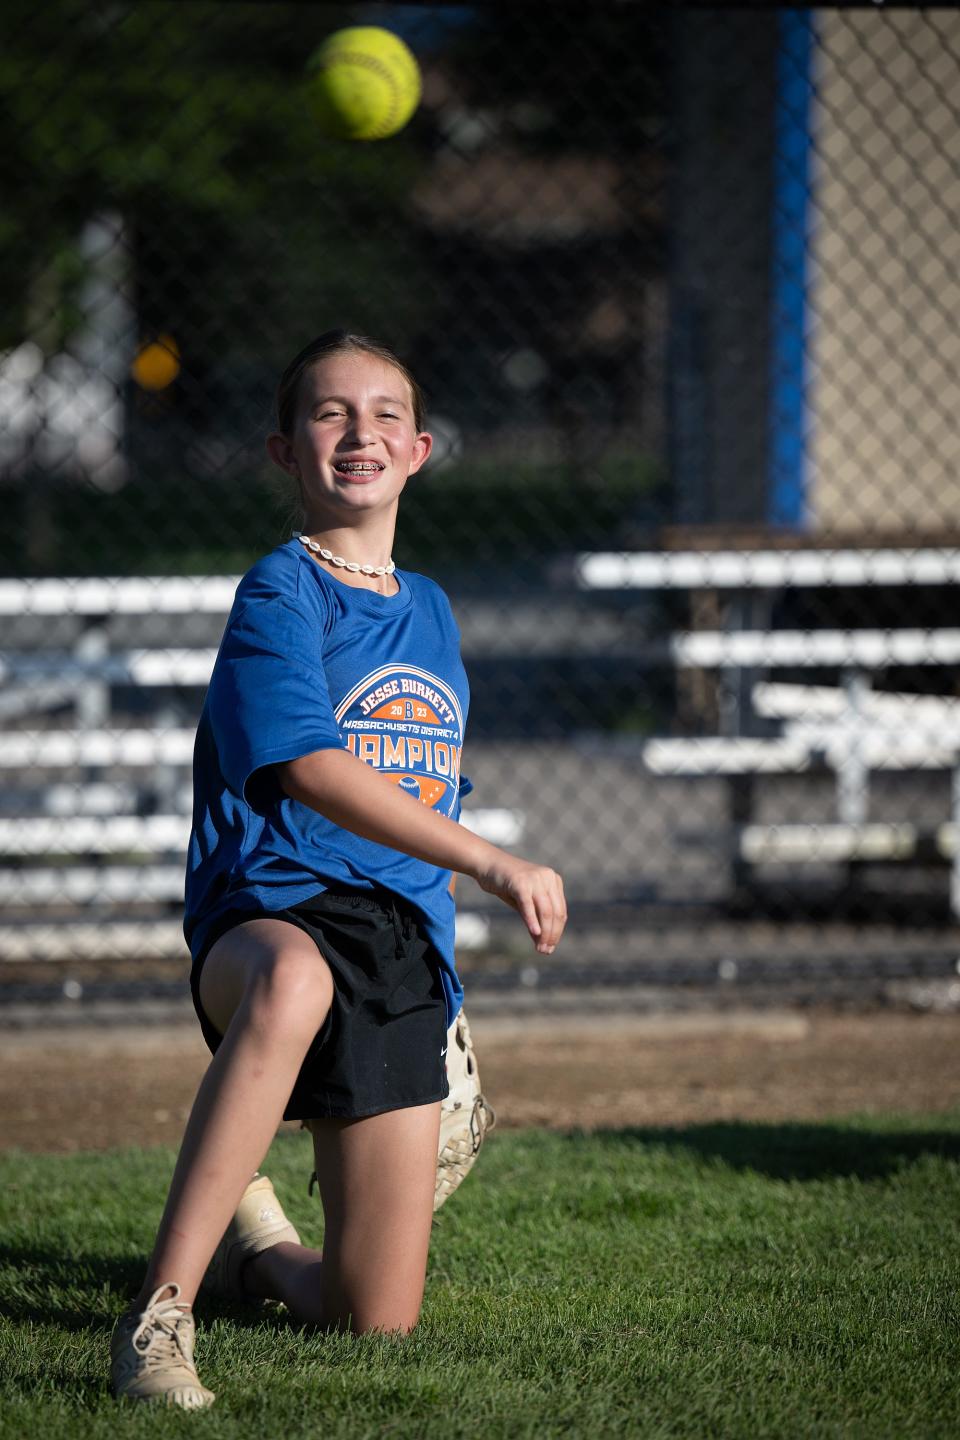 Jesse Burkett 12U's Mady Smith throws the ball during a warmup drill Thursday at Rockwood Field.